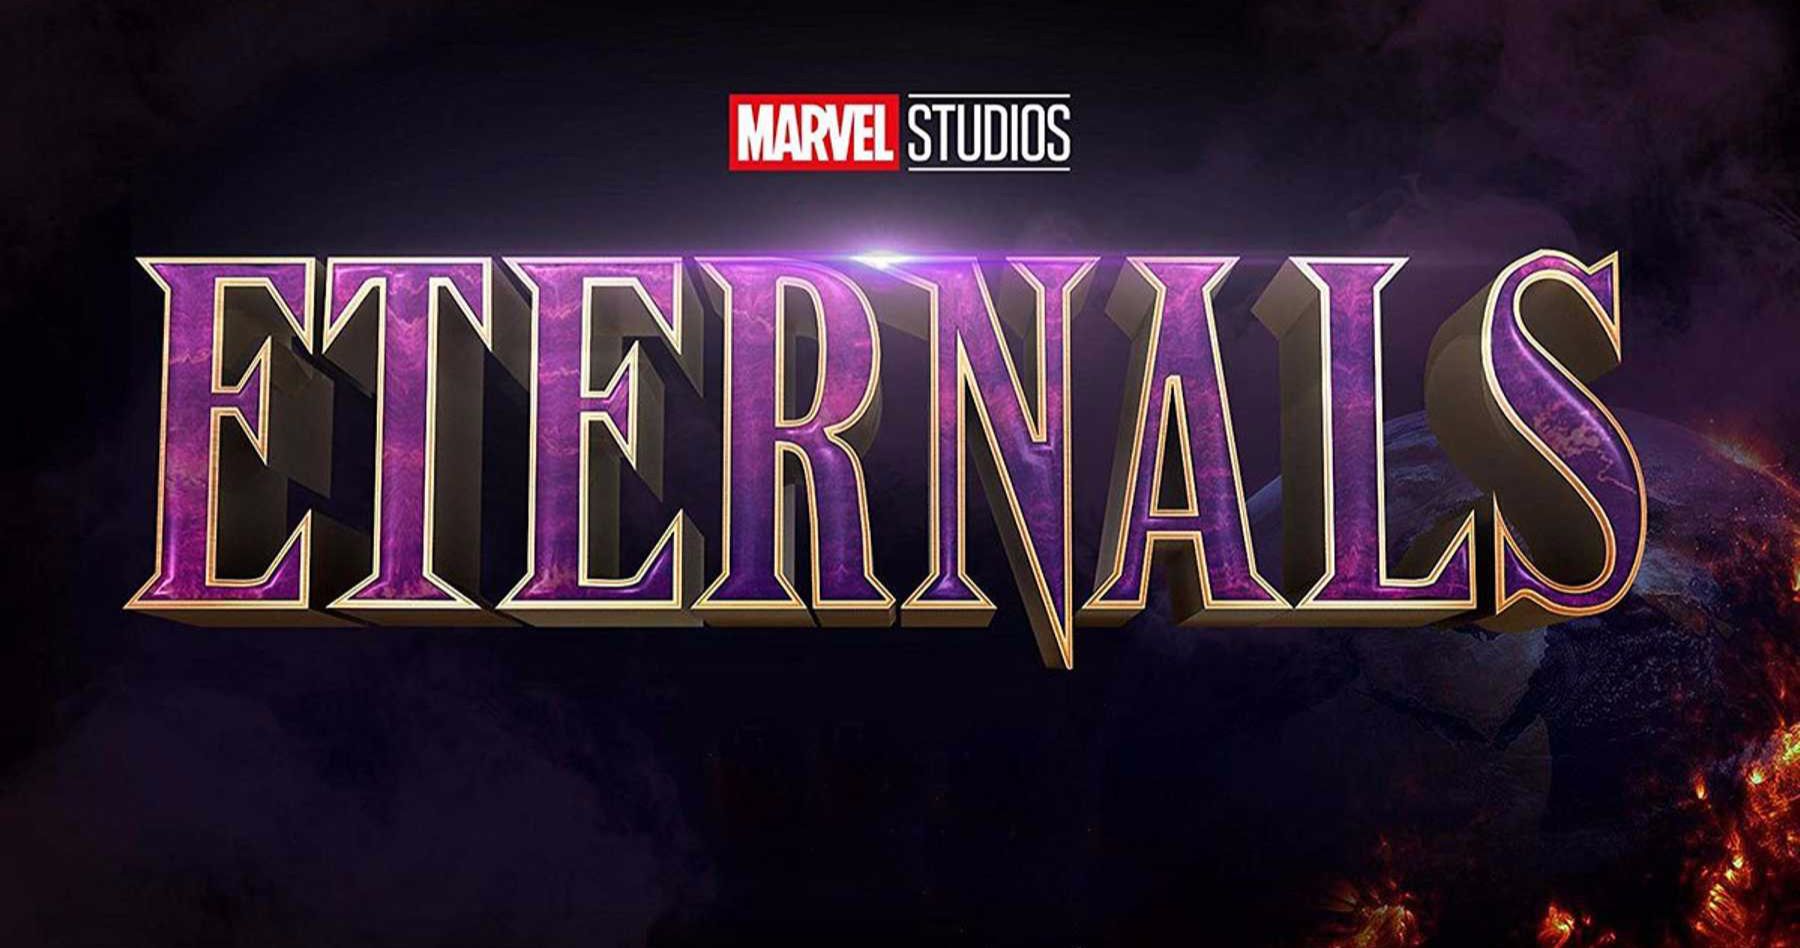 Marvel's Eternals Star Accidently Leaks First Poster?